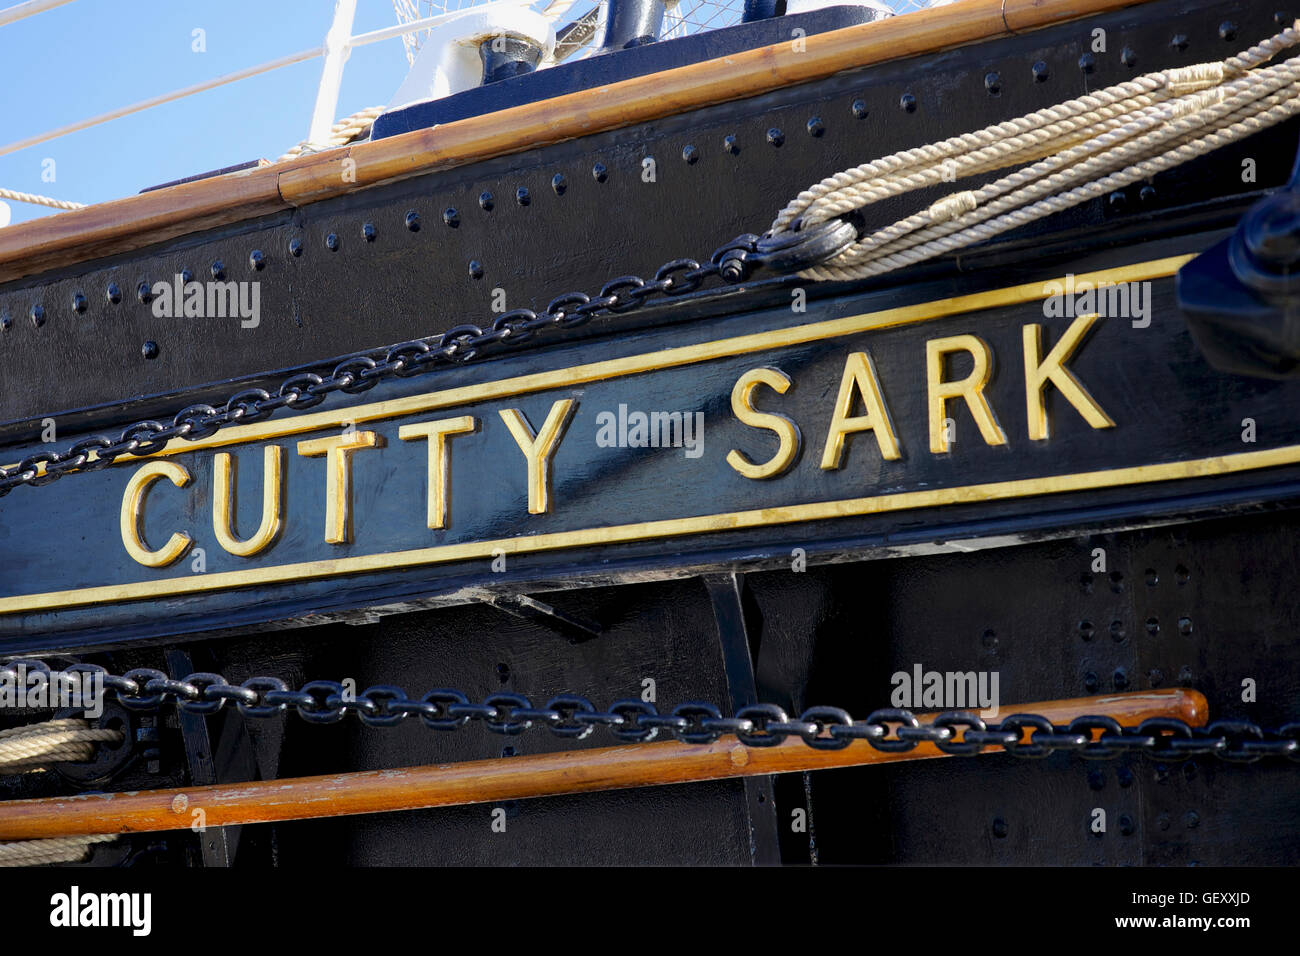 The Cutty Sark is a British tea clipper ship built in 1869 and moored near the Thames at Greenwich in London. Stock Photo